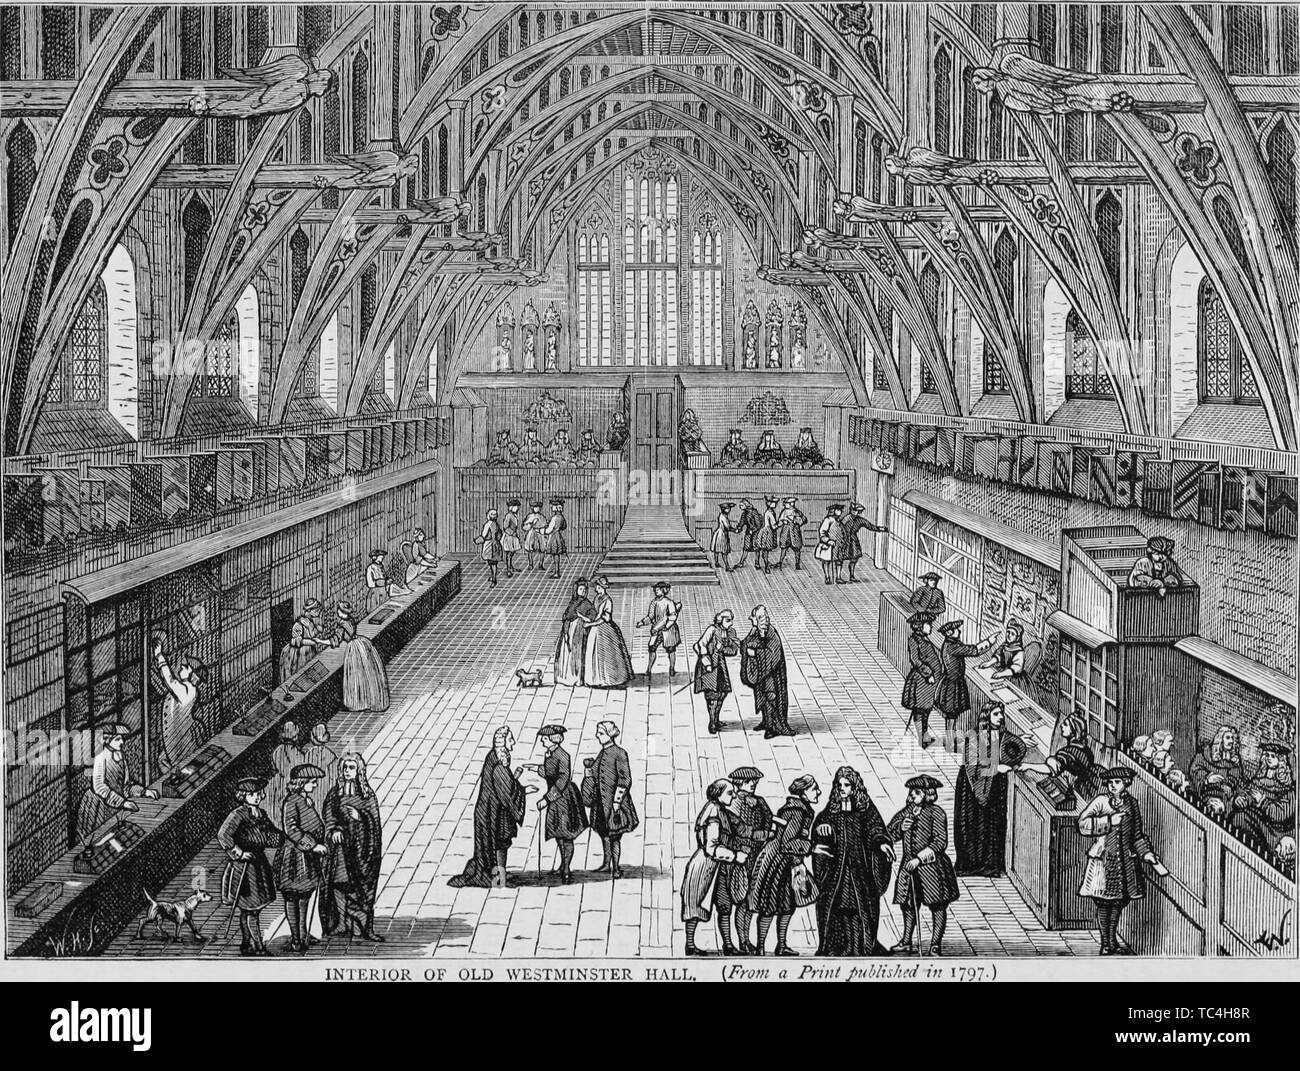 Engraving of the Westminster Hall interior, London, England, from the book 'Old and new London: a narrative of its history, its people, and its places' by Thornbury Walter, 1873. Courtesy Internet Archive. () Stock Photo